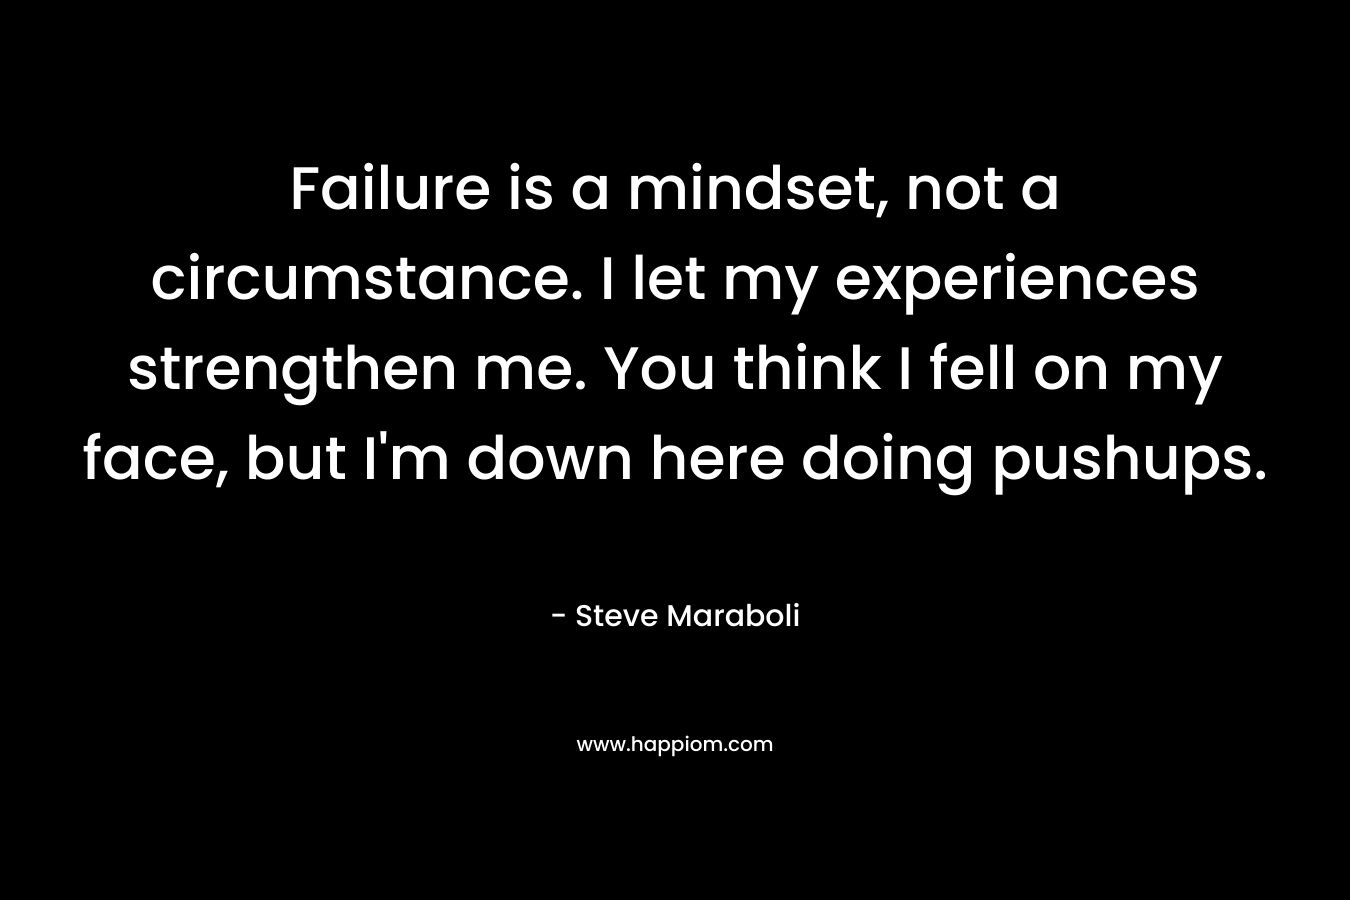 Failure is a mindset, not a circumstance. I let my experiences strengthen me. You think I fell on my face, but I'm down here doing pushups.